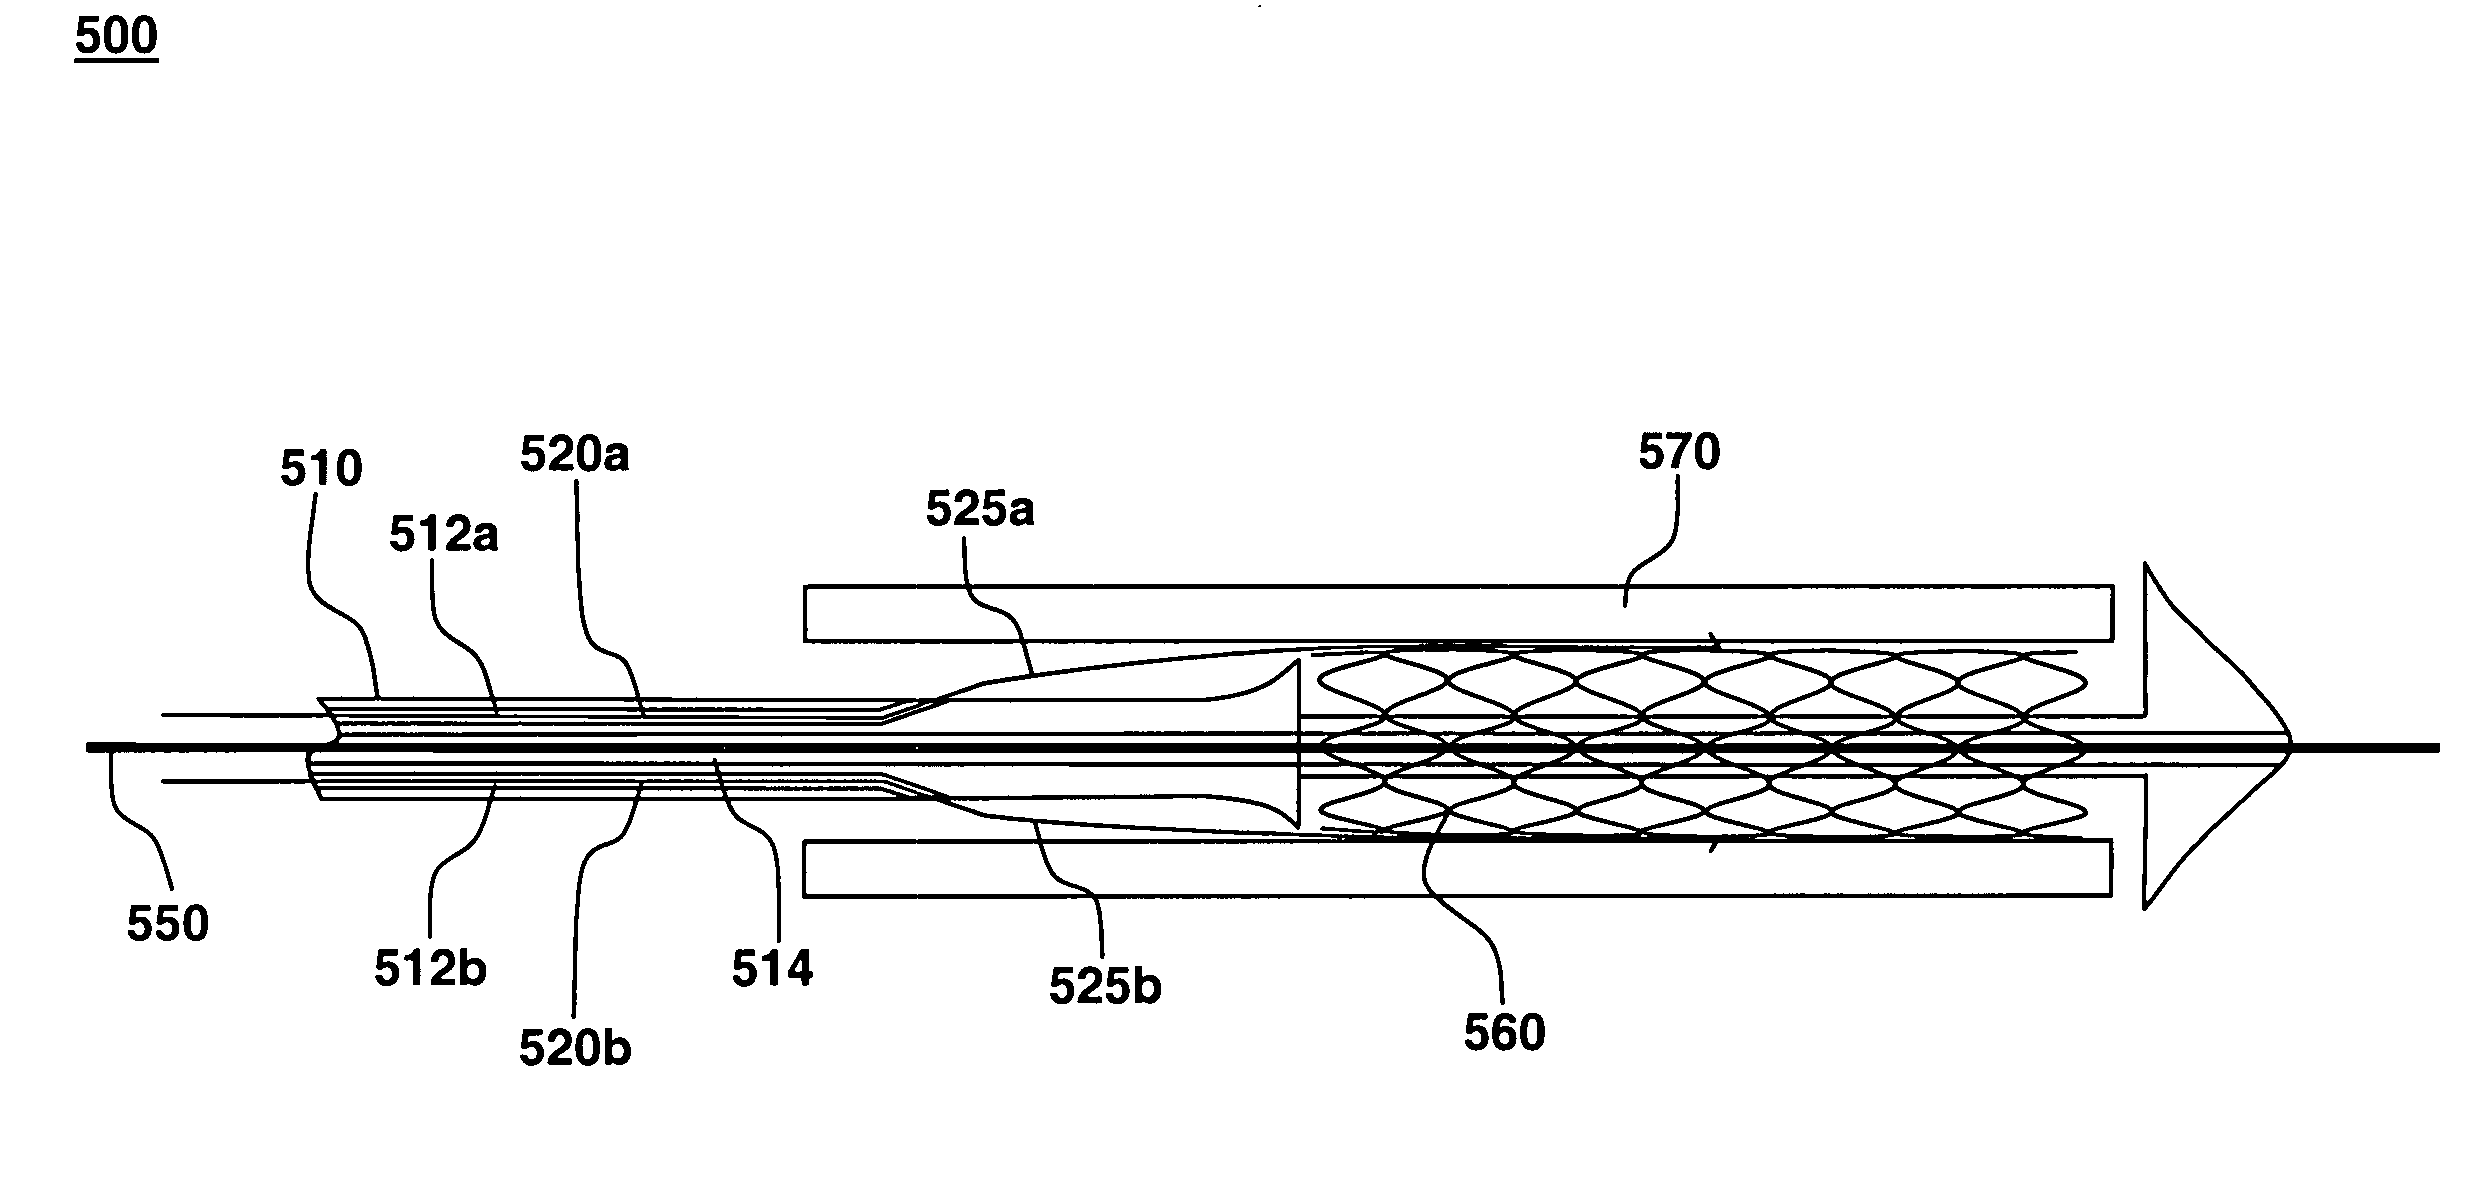 Stent delivery system with multiple evenly spaced pullwires